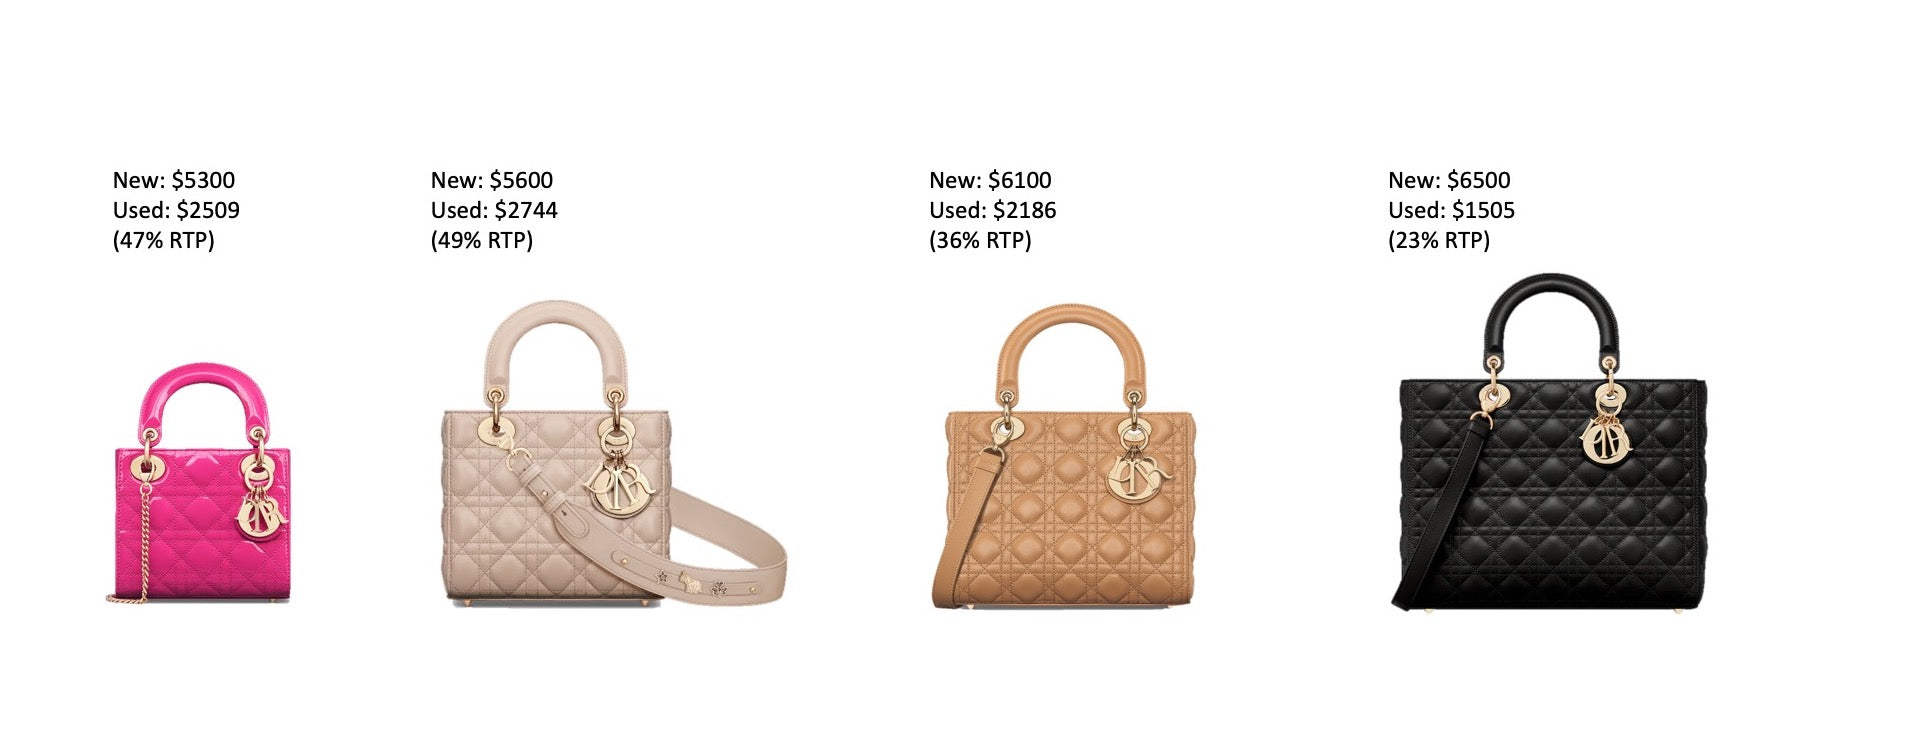 lady dior retail price for brand new bag and second hand bag by sizes, mini, small, medium large